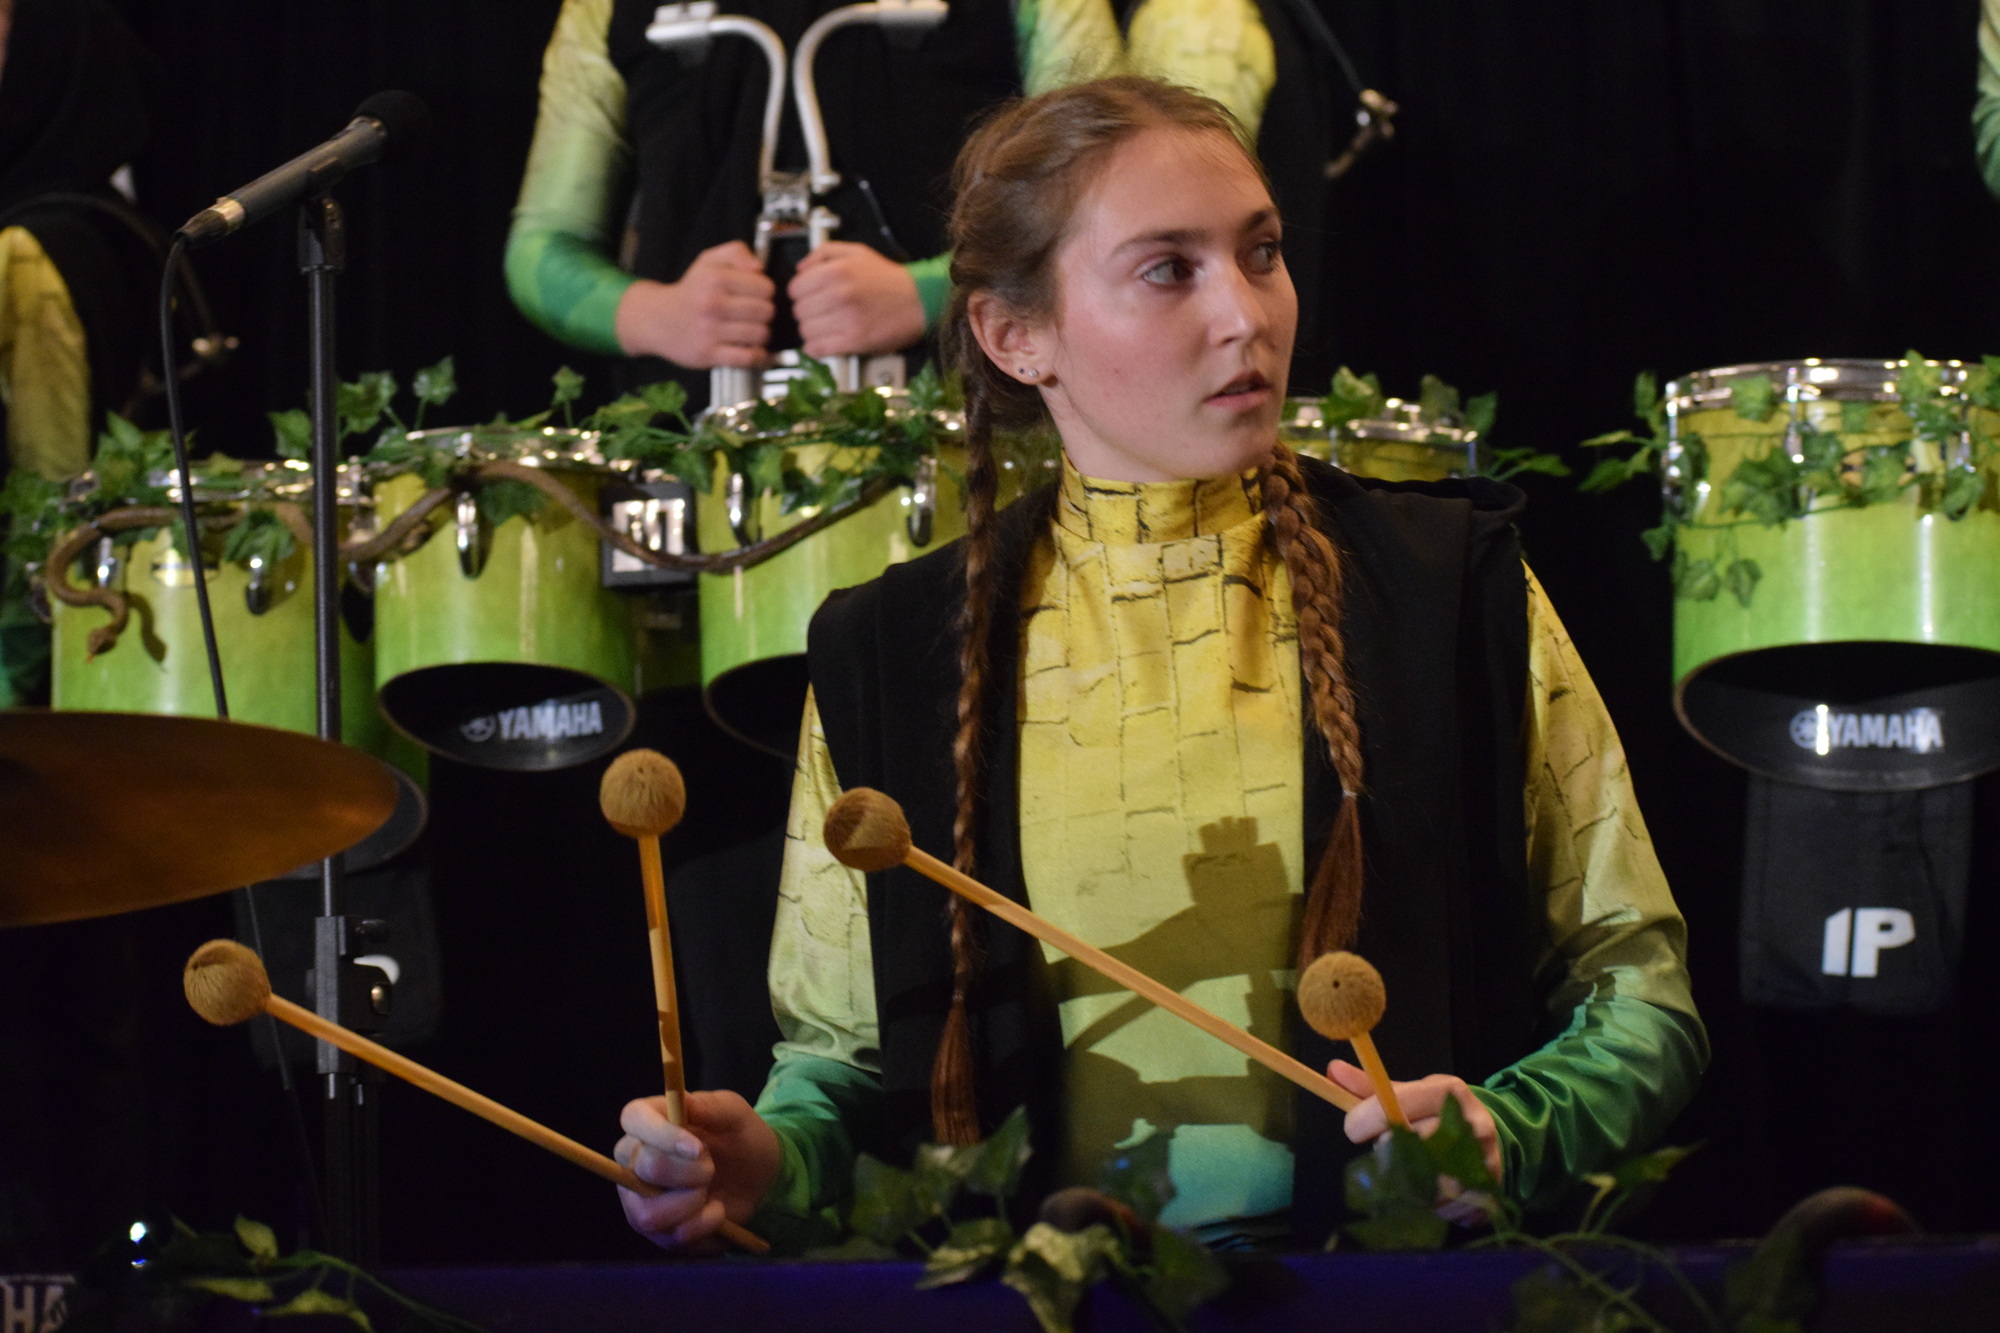 Lakewood Ranch High School junior Abby Newton plays in unison with others in the Indoor Percussion Ensemble. Lakewood Ranch High's marching band program will receive $15,000 for its marching show and staff. (File photo)